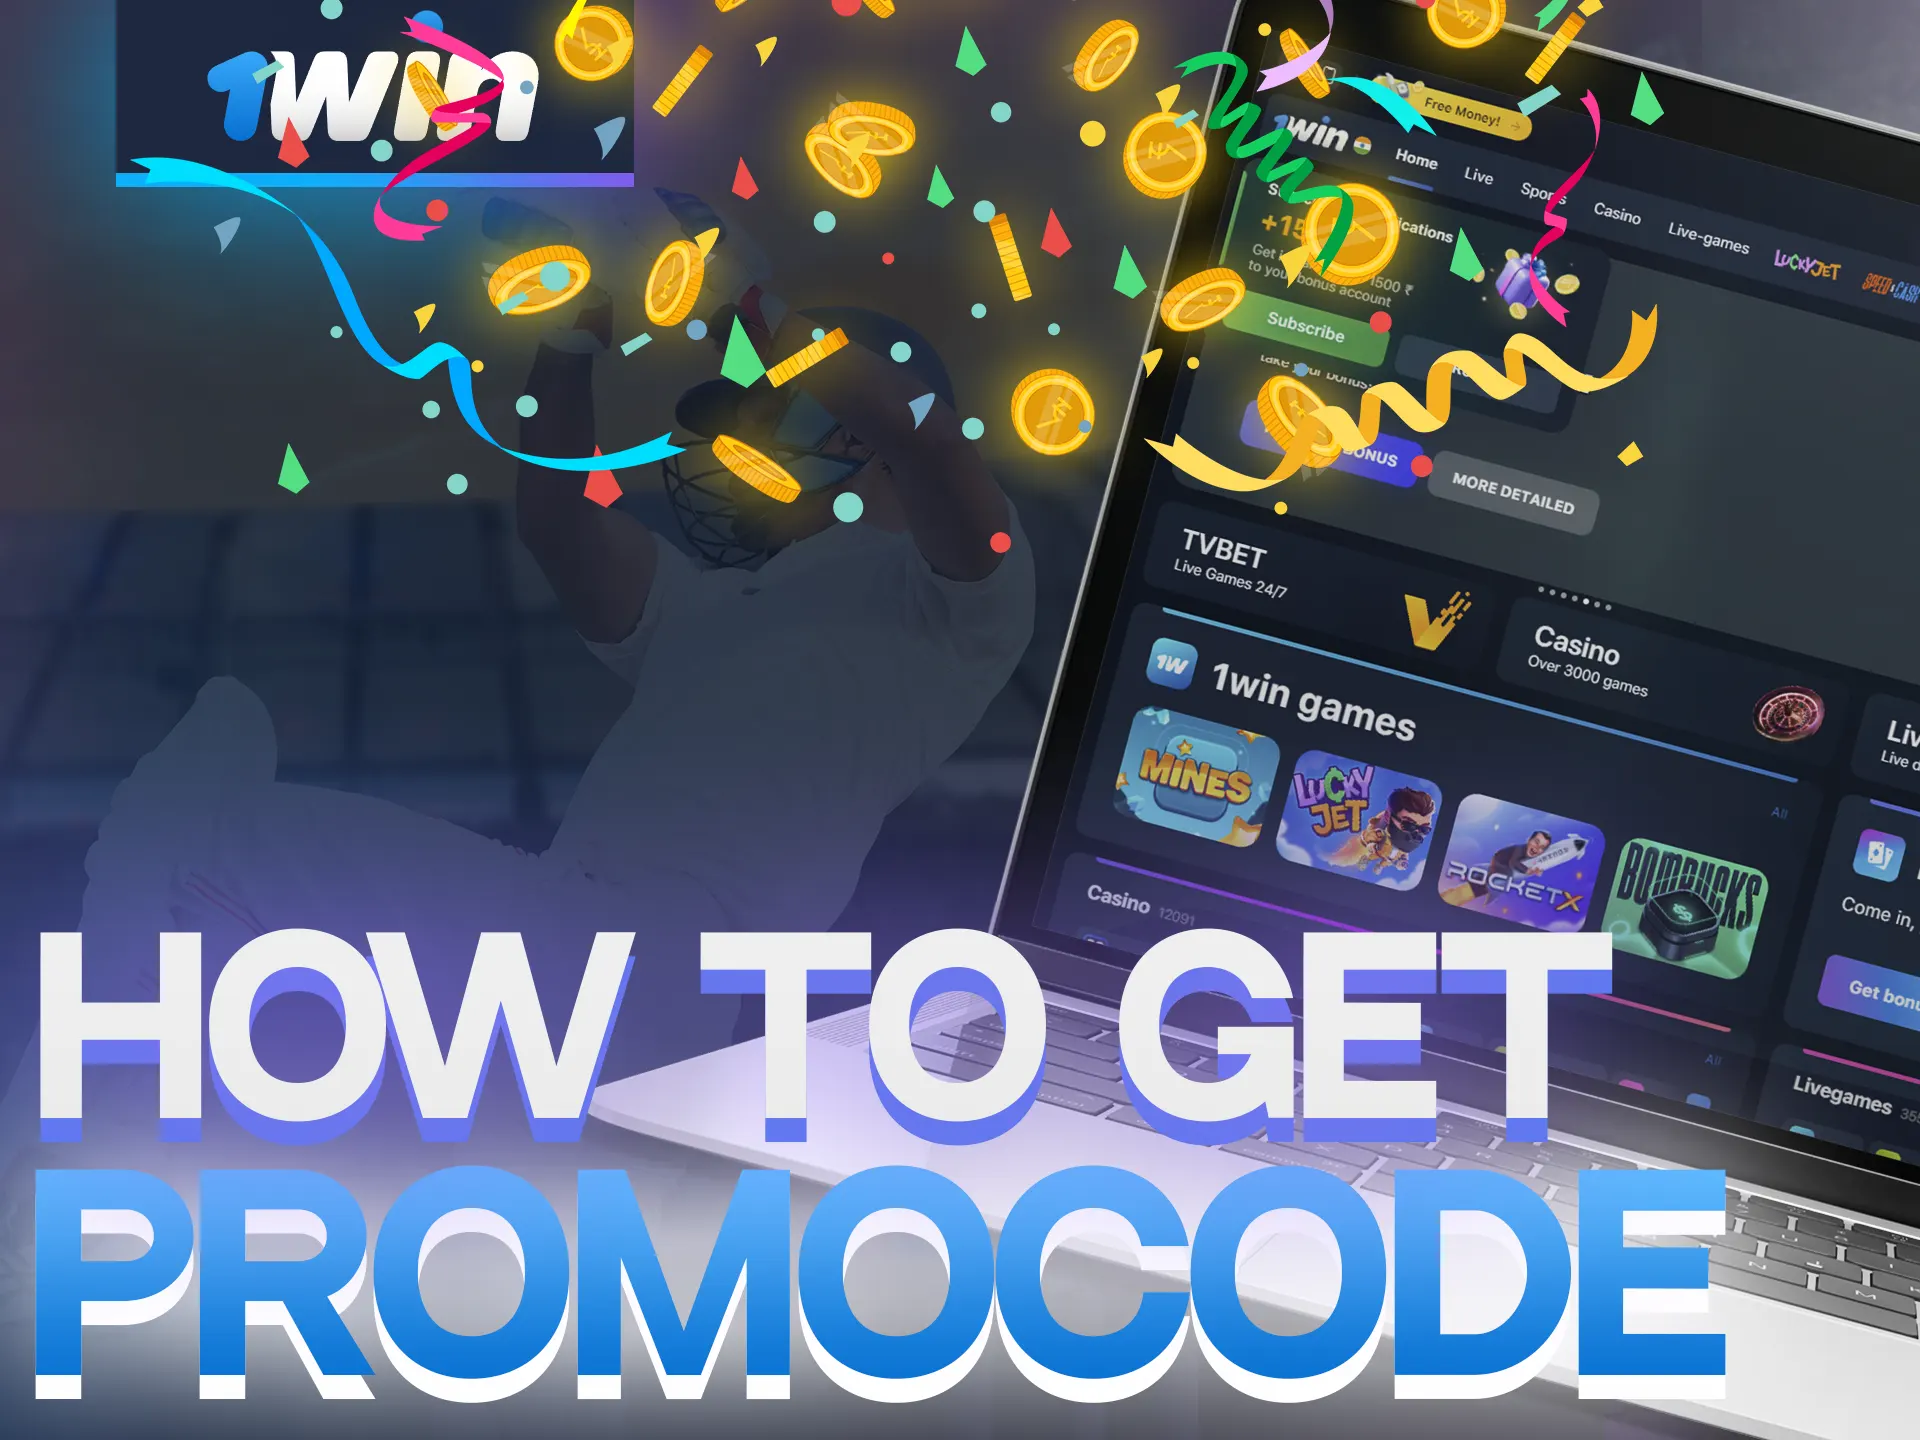 Learn how to get a special 1Win promo code.